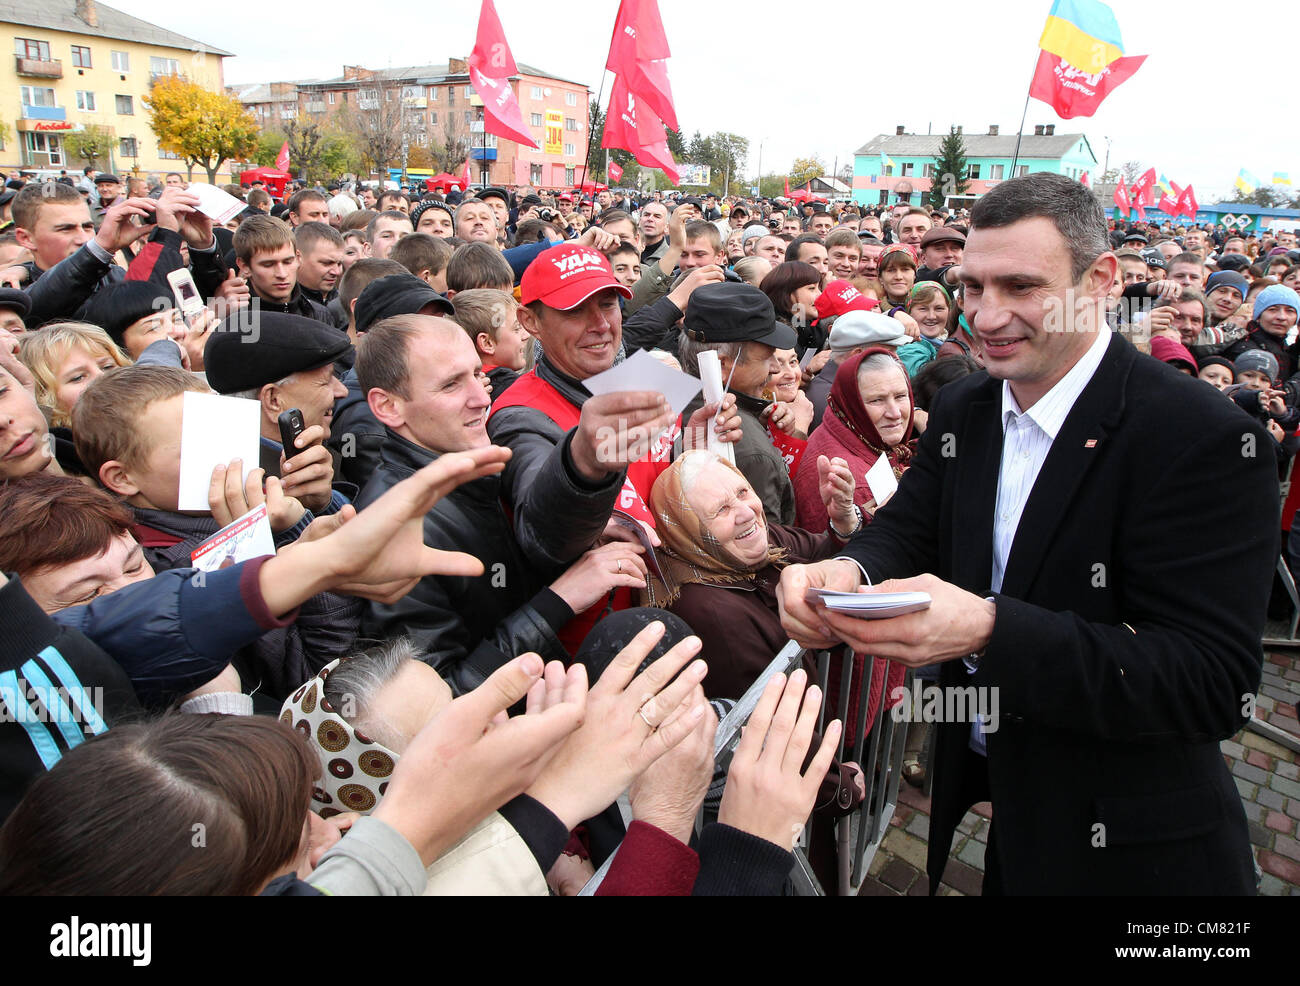 Oct. 25, 2012 - Ukraine - Boxer Vitali Klitschko, as politician, is a serious challenger at parliamentary elections in Ukraine. The UDAR Party leader Vitali Klitschko calls on Ukrainians 'not to turn a blind eye' to election fraud...Pictured: October 25,2012.Rovno region of Ukraine. The UDAR Party leader Vitali Klitschko at the meeting with his party supporters in Rovno region of Ukraine. (Credit Image: © PhotoXpress/ZUMAPRESS.com) Stock Photo